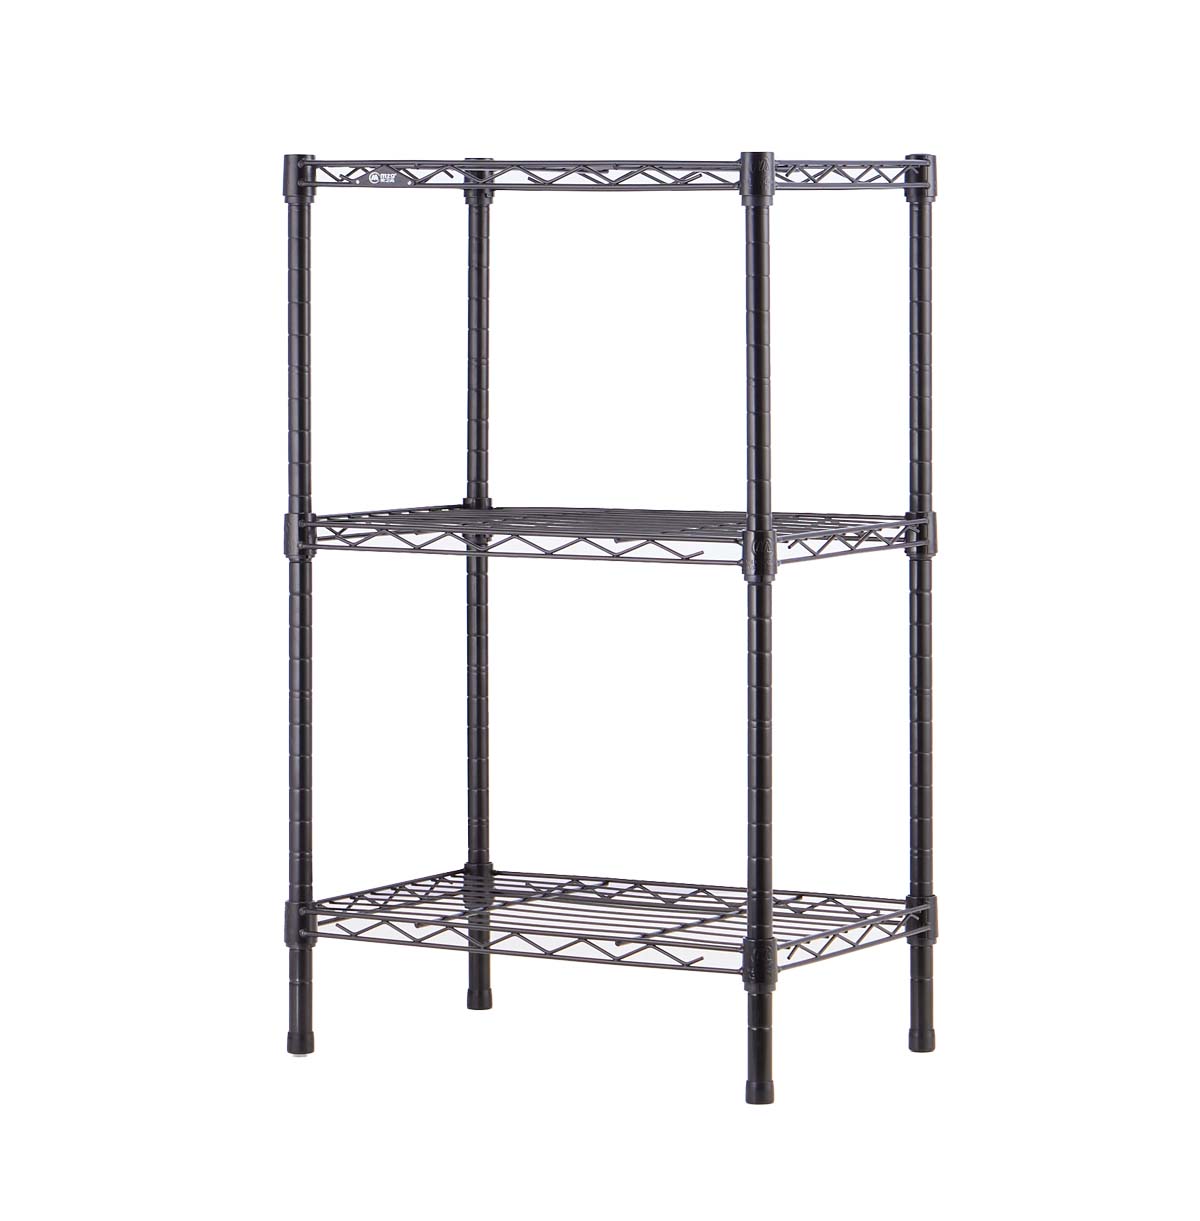 3 tier wire shelving unit price